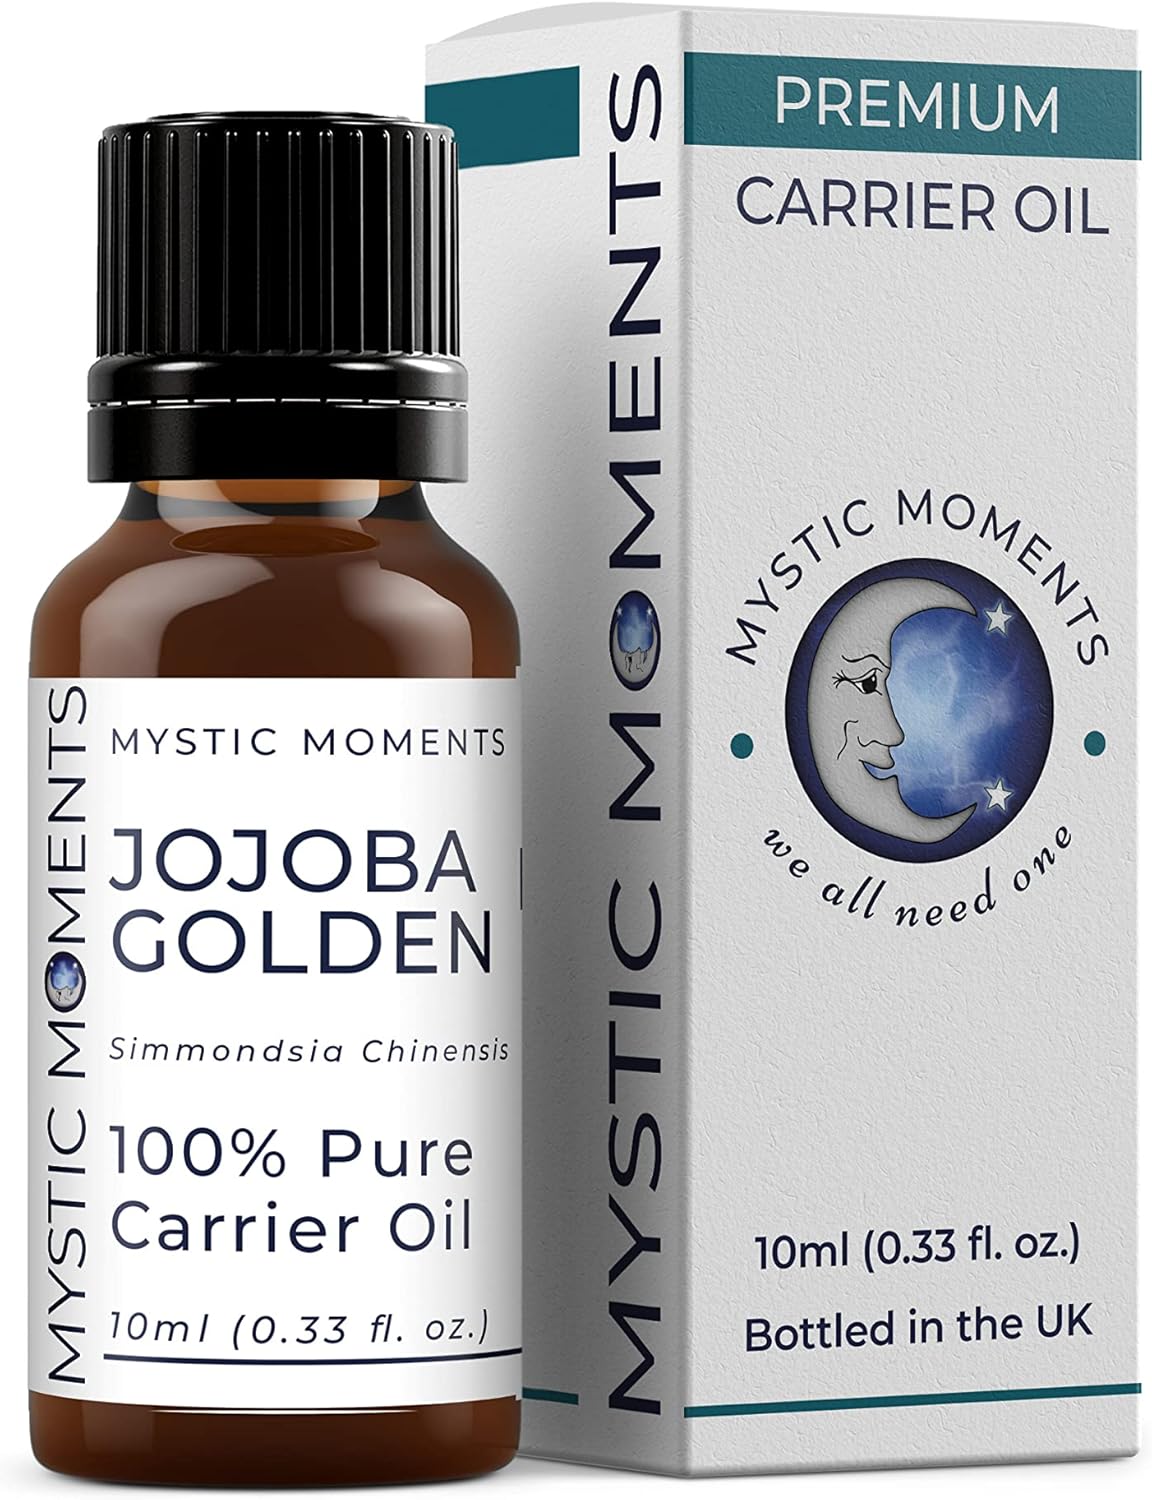 Mystic Moments | Jojoba Golden Carrier Oil 10ml - Pure & Natural Oil Perfect for Hair, Face, Nails, Aromatherapy, Massage and Oil Dilution Vegan GMO Free